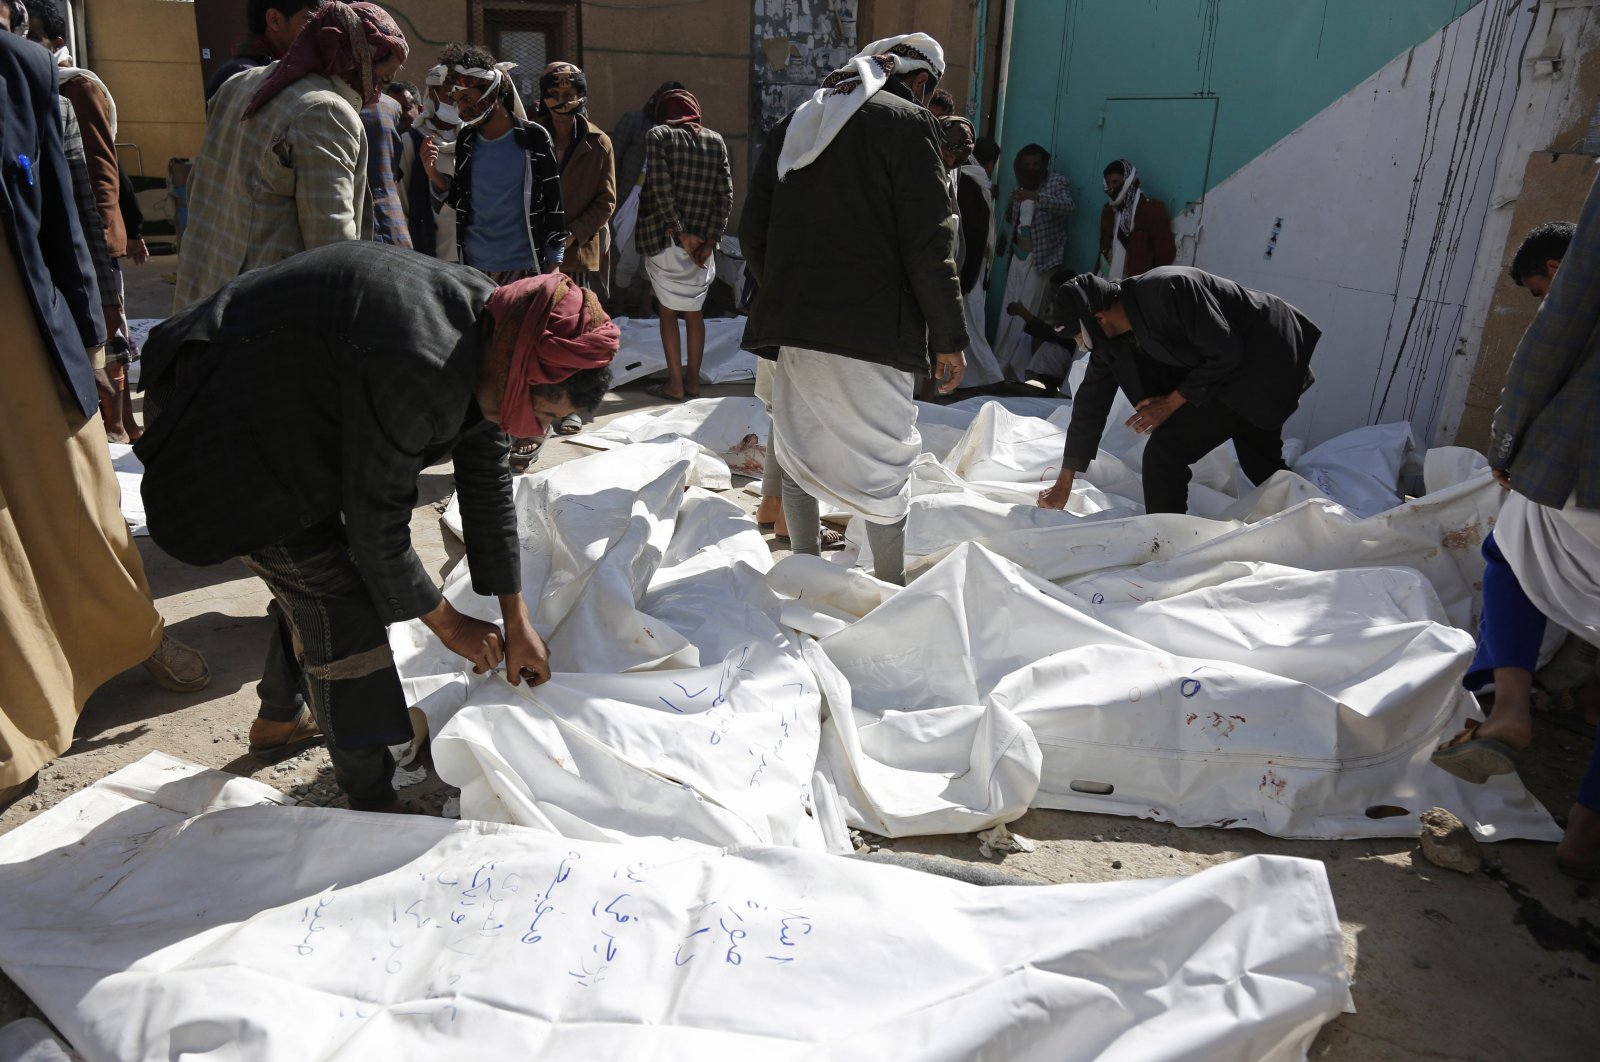 People look at the covered bodies of casualties from a Saudi-led coalition airstrike that killed at least 87 people, in a stronghold of Houthi rebels on the border with Saudi Arabia, in the northern Saada province of Yemen, Jan. 22, 2022. (AP Photo)